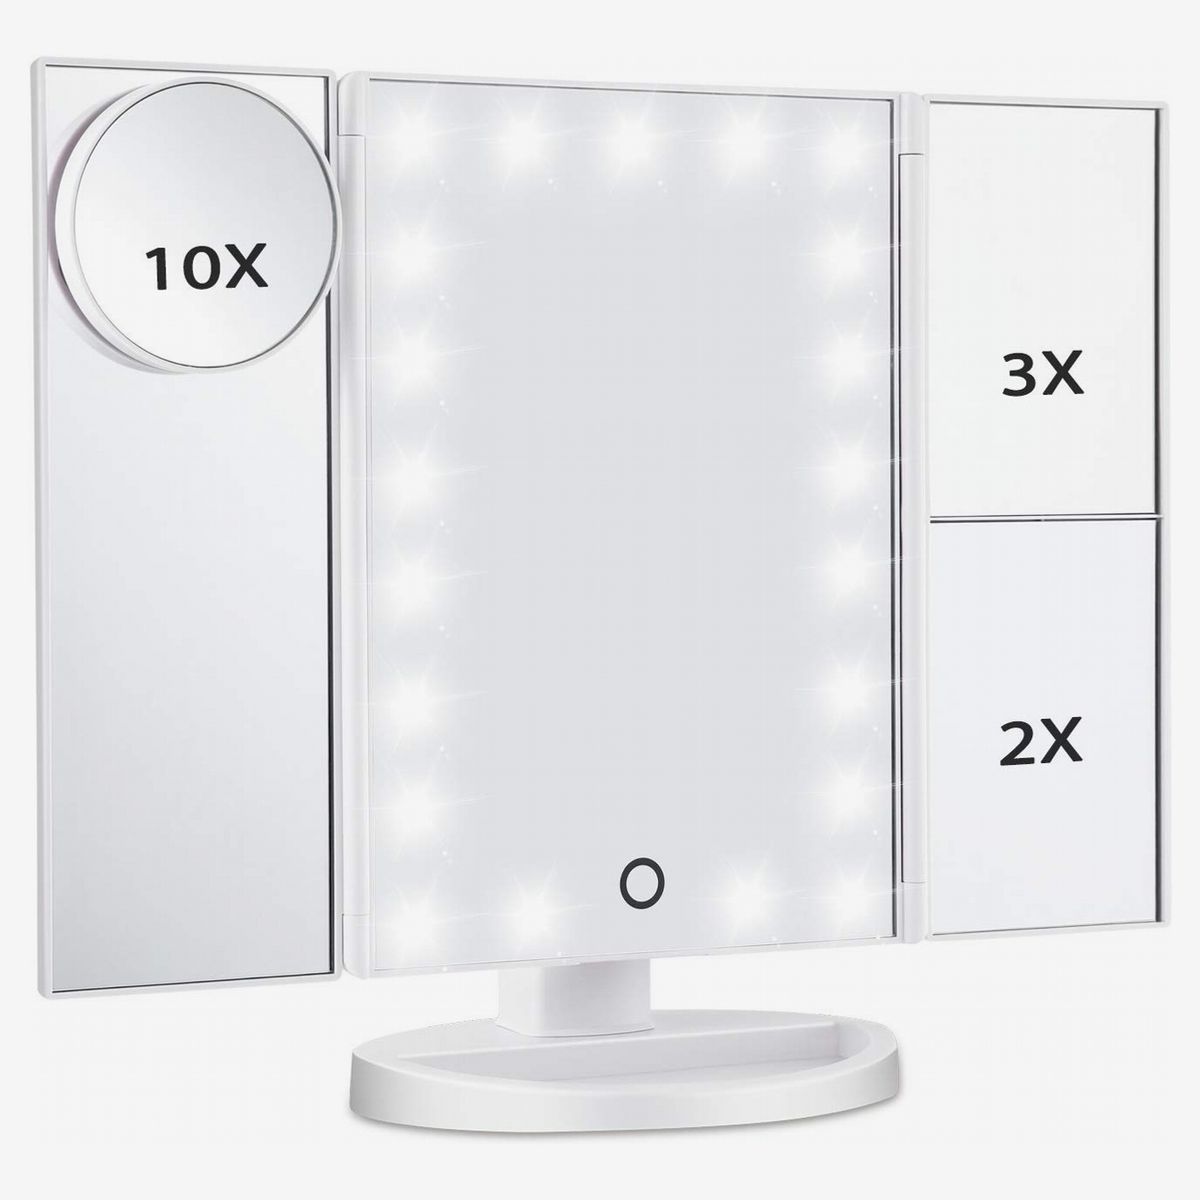 14 Best Lighted Makeup Mirrors 2021, Makeup Mirror With Lights Best